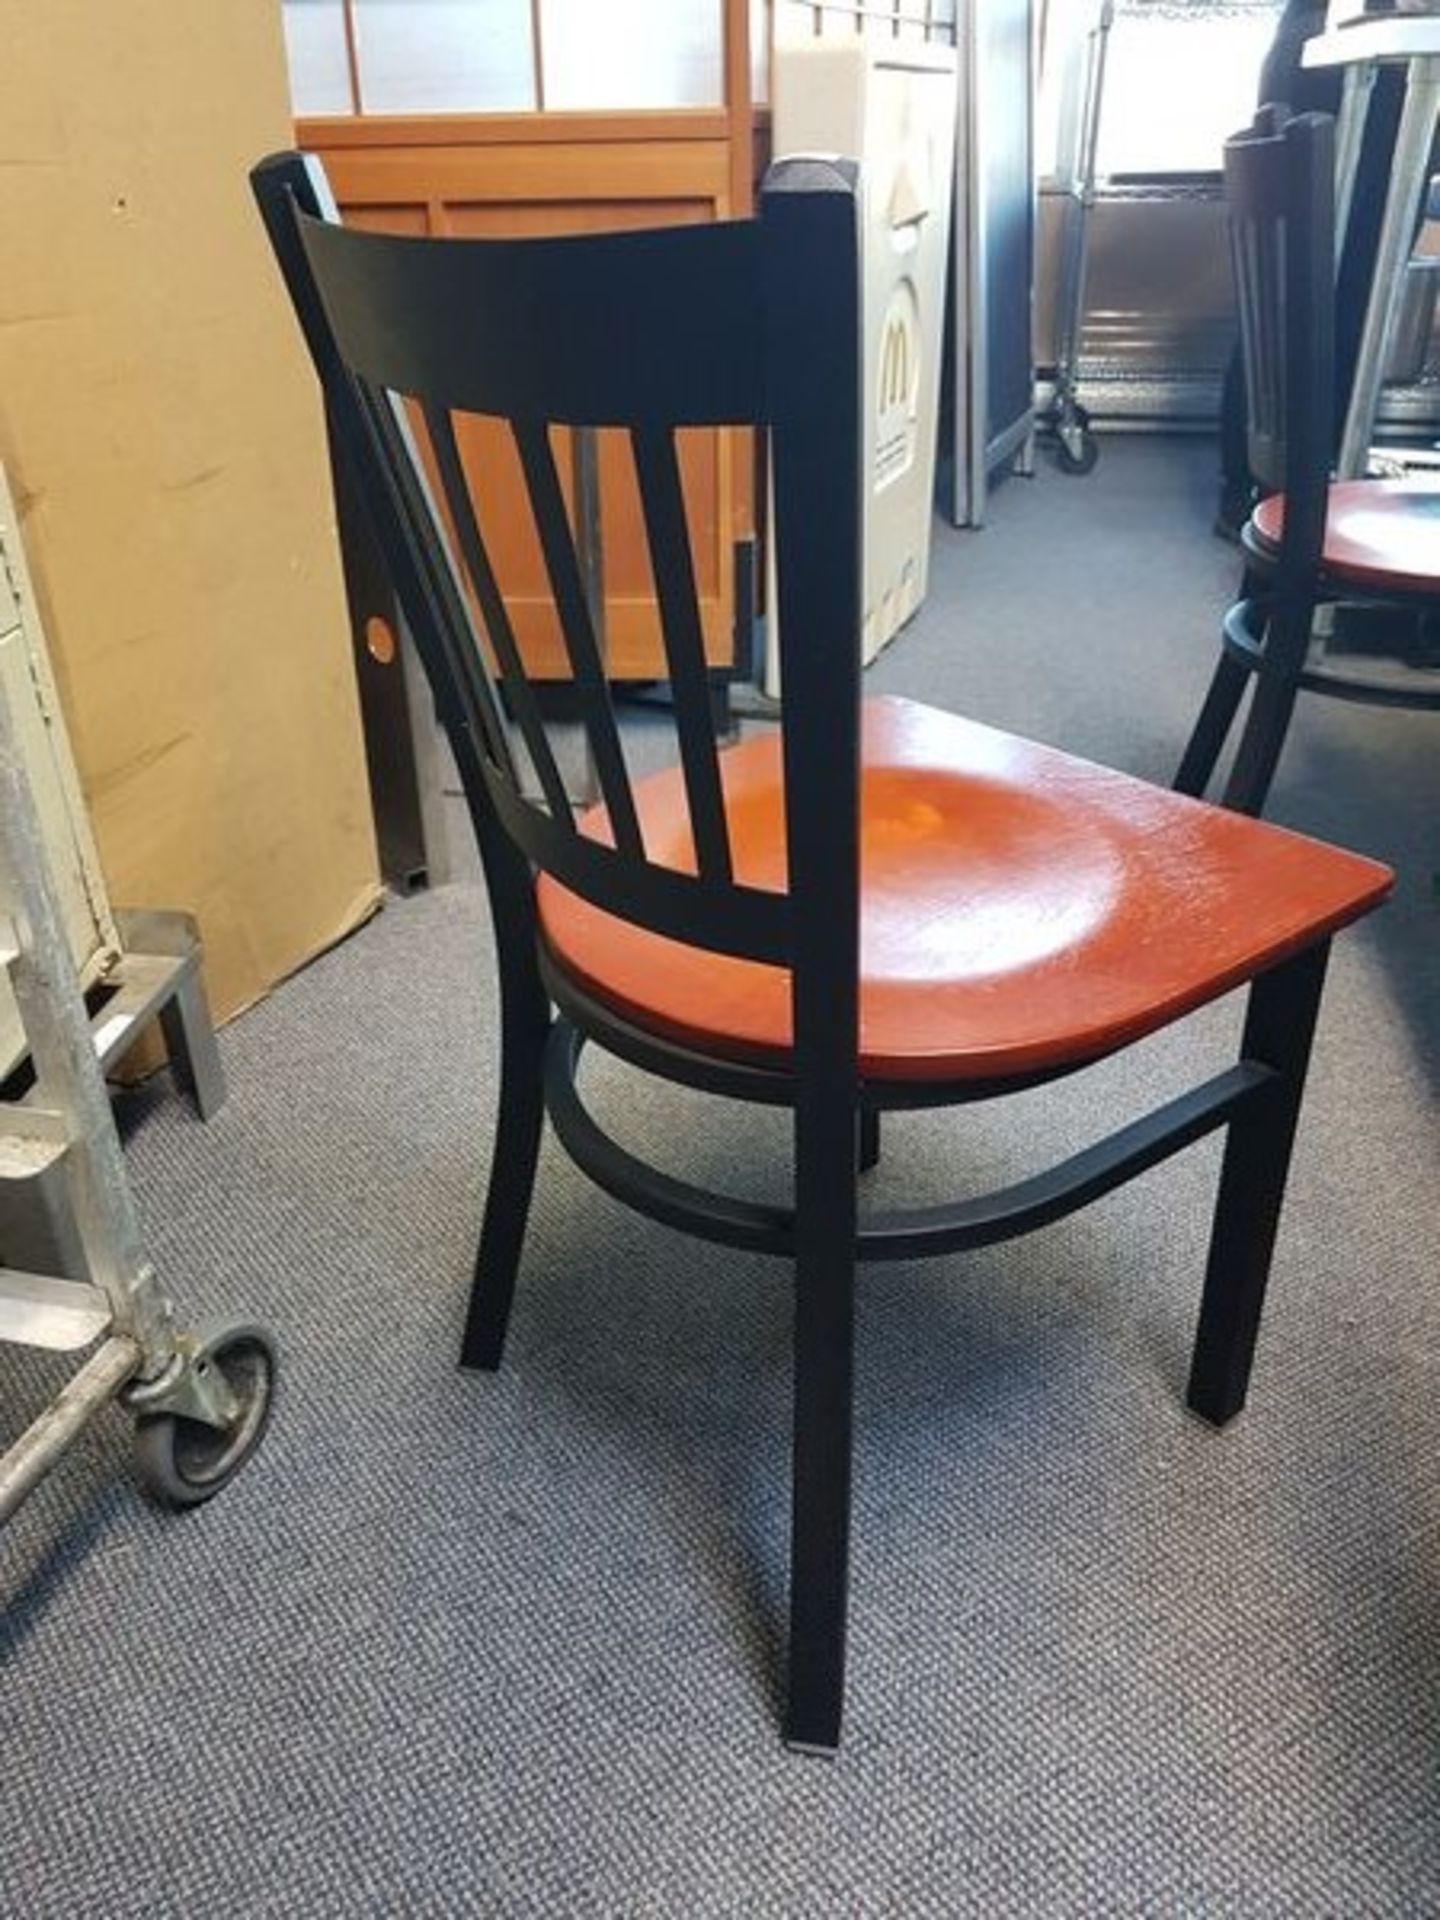 4 Black Metal Framed Chairs with Wood Seats